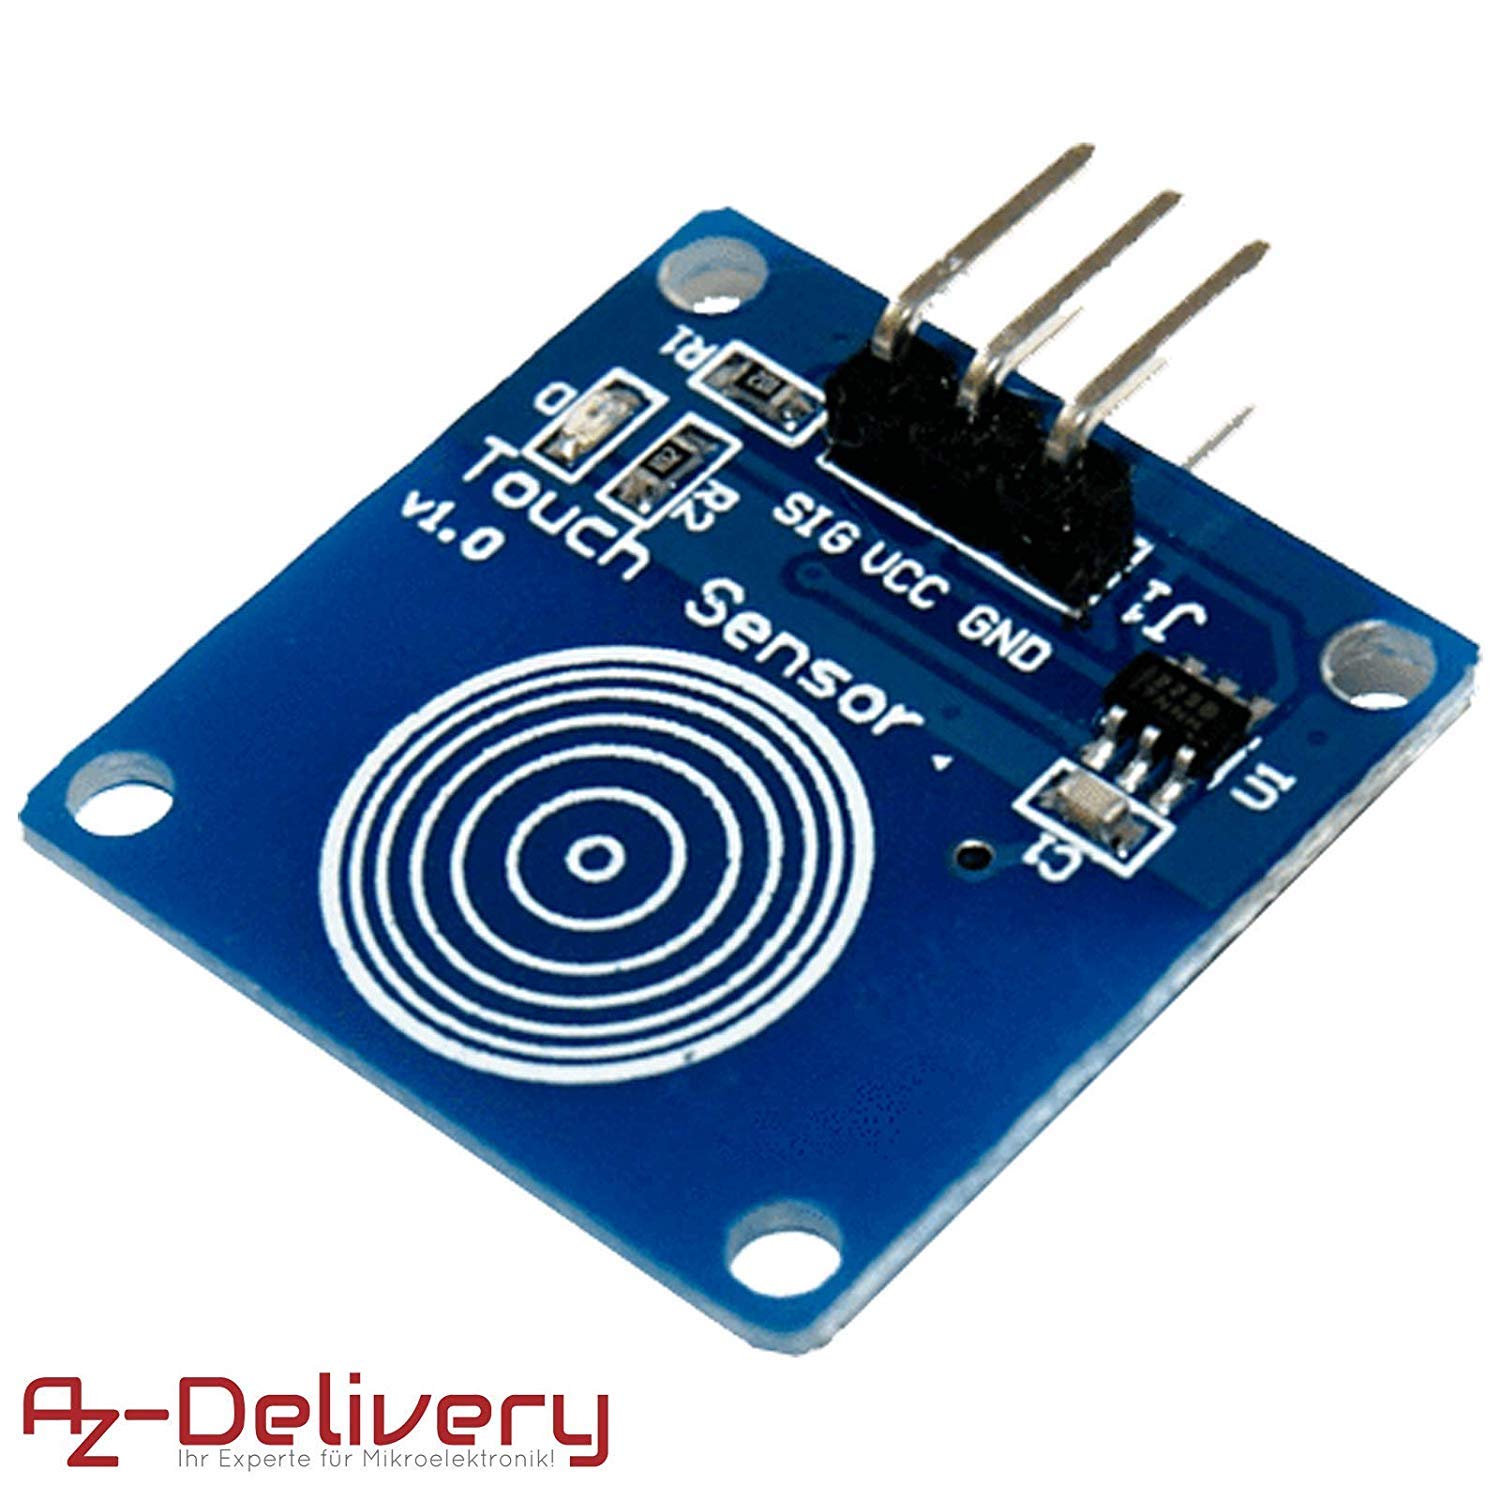 TTP223B Digital Touch Sensor Capacitive Switch Module For Arduino Including EBook